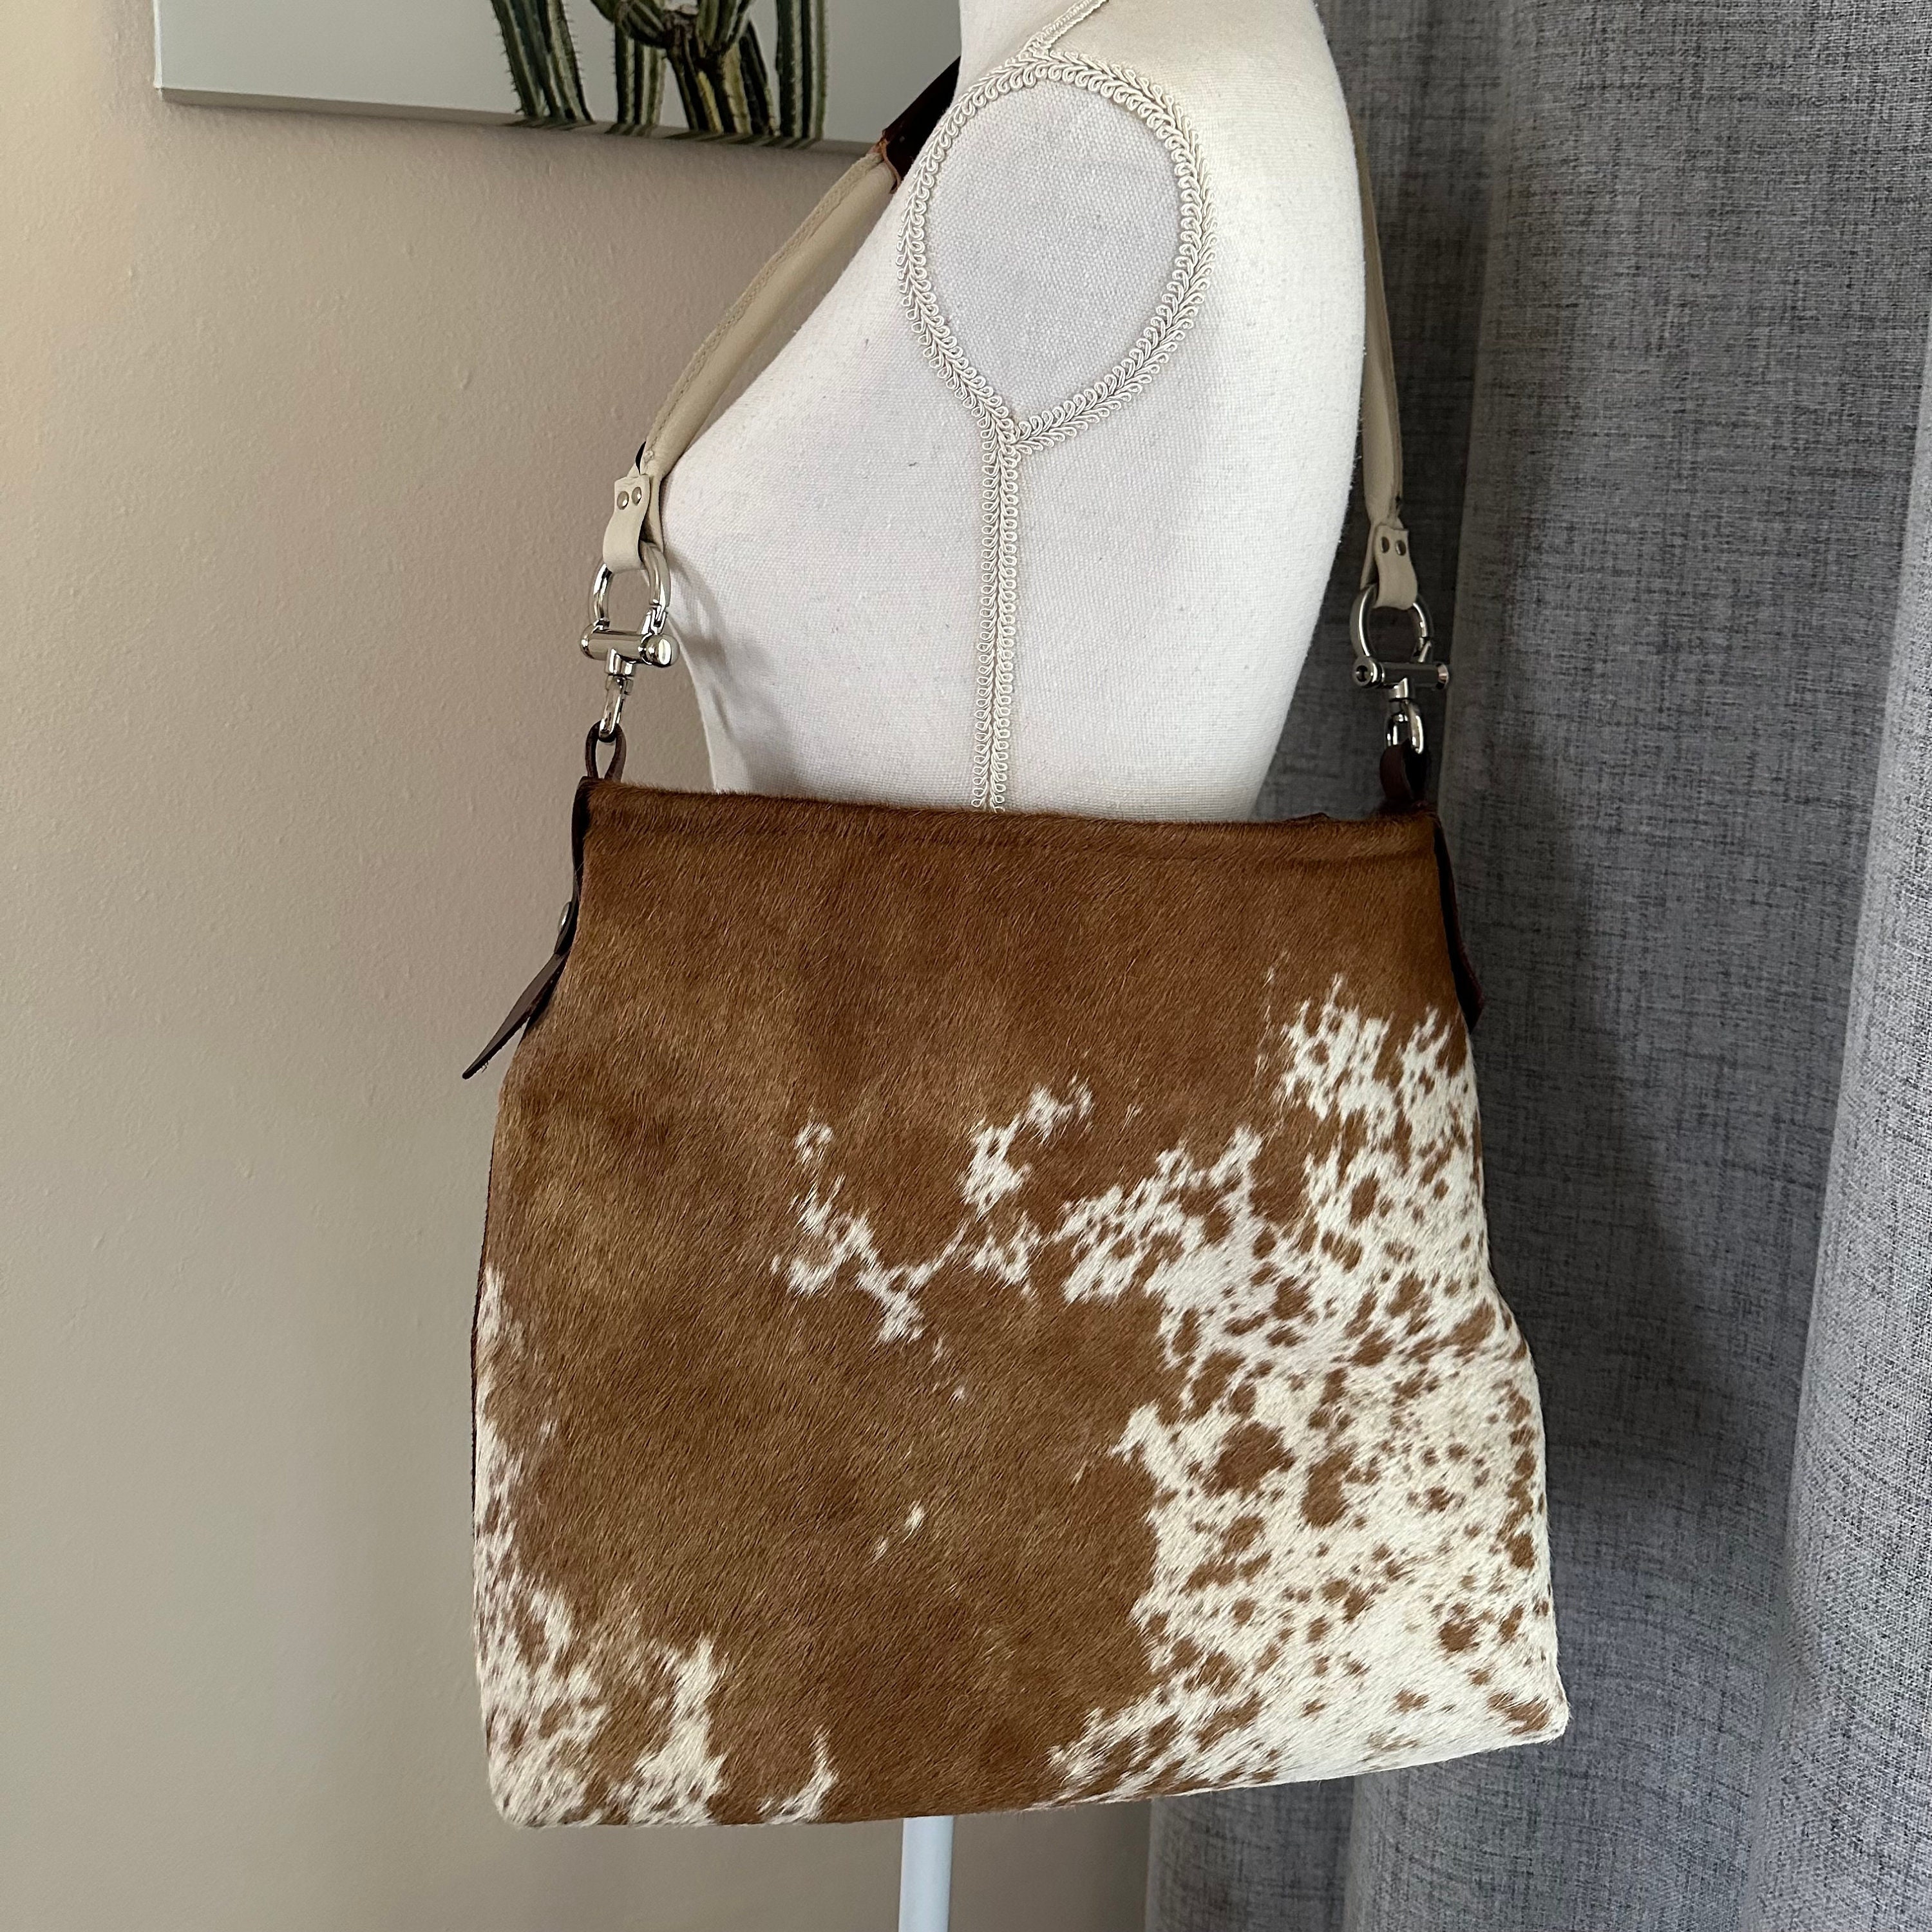 Louis Vuitton Cow Print Upcycled Duffle Bag! - $200 New With Tags